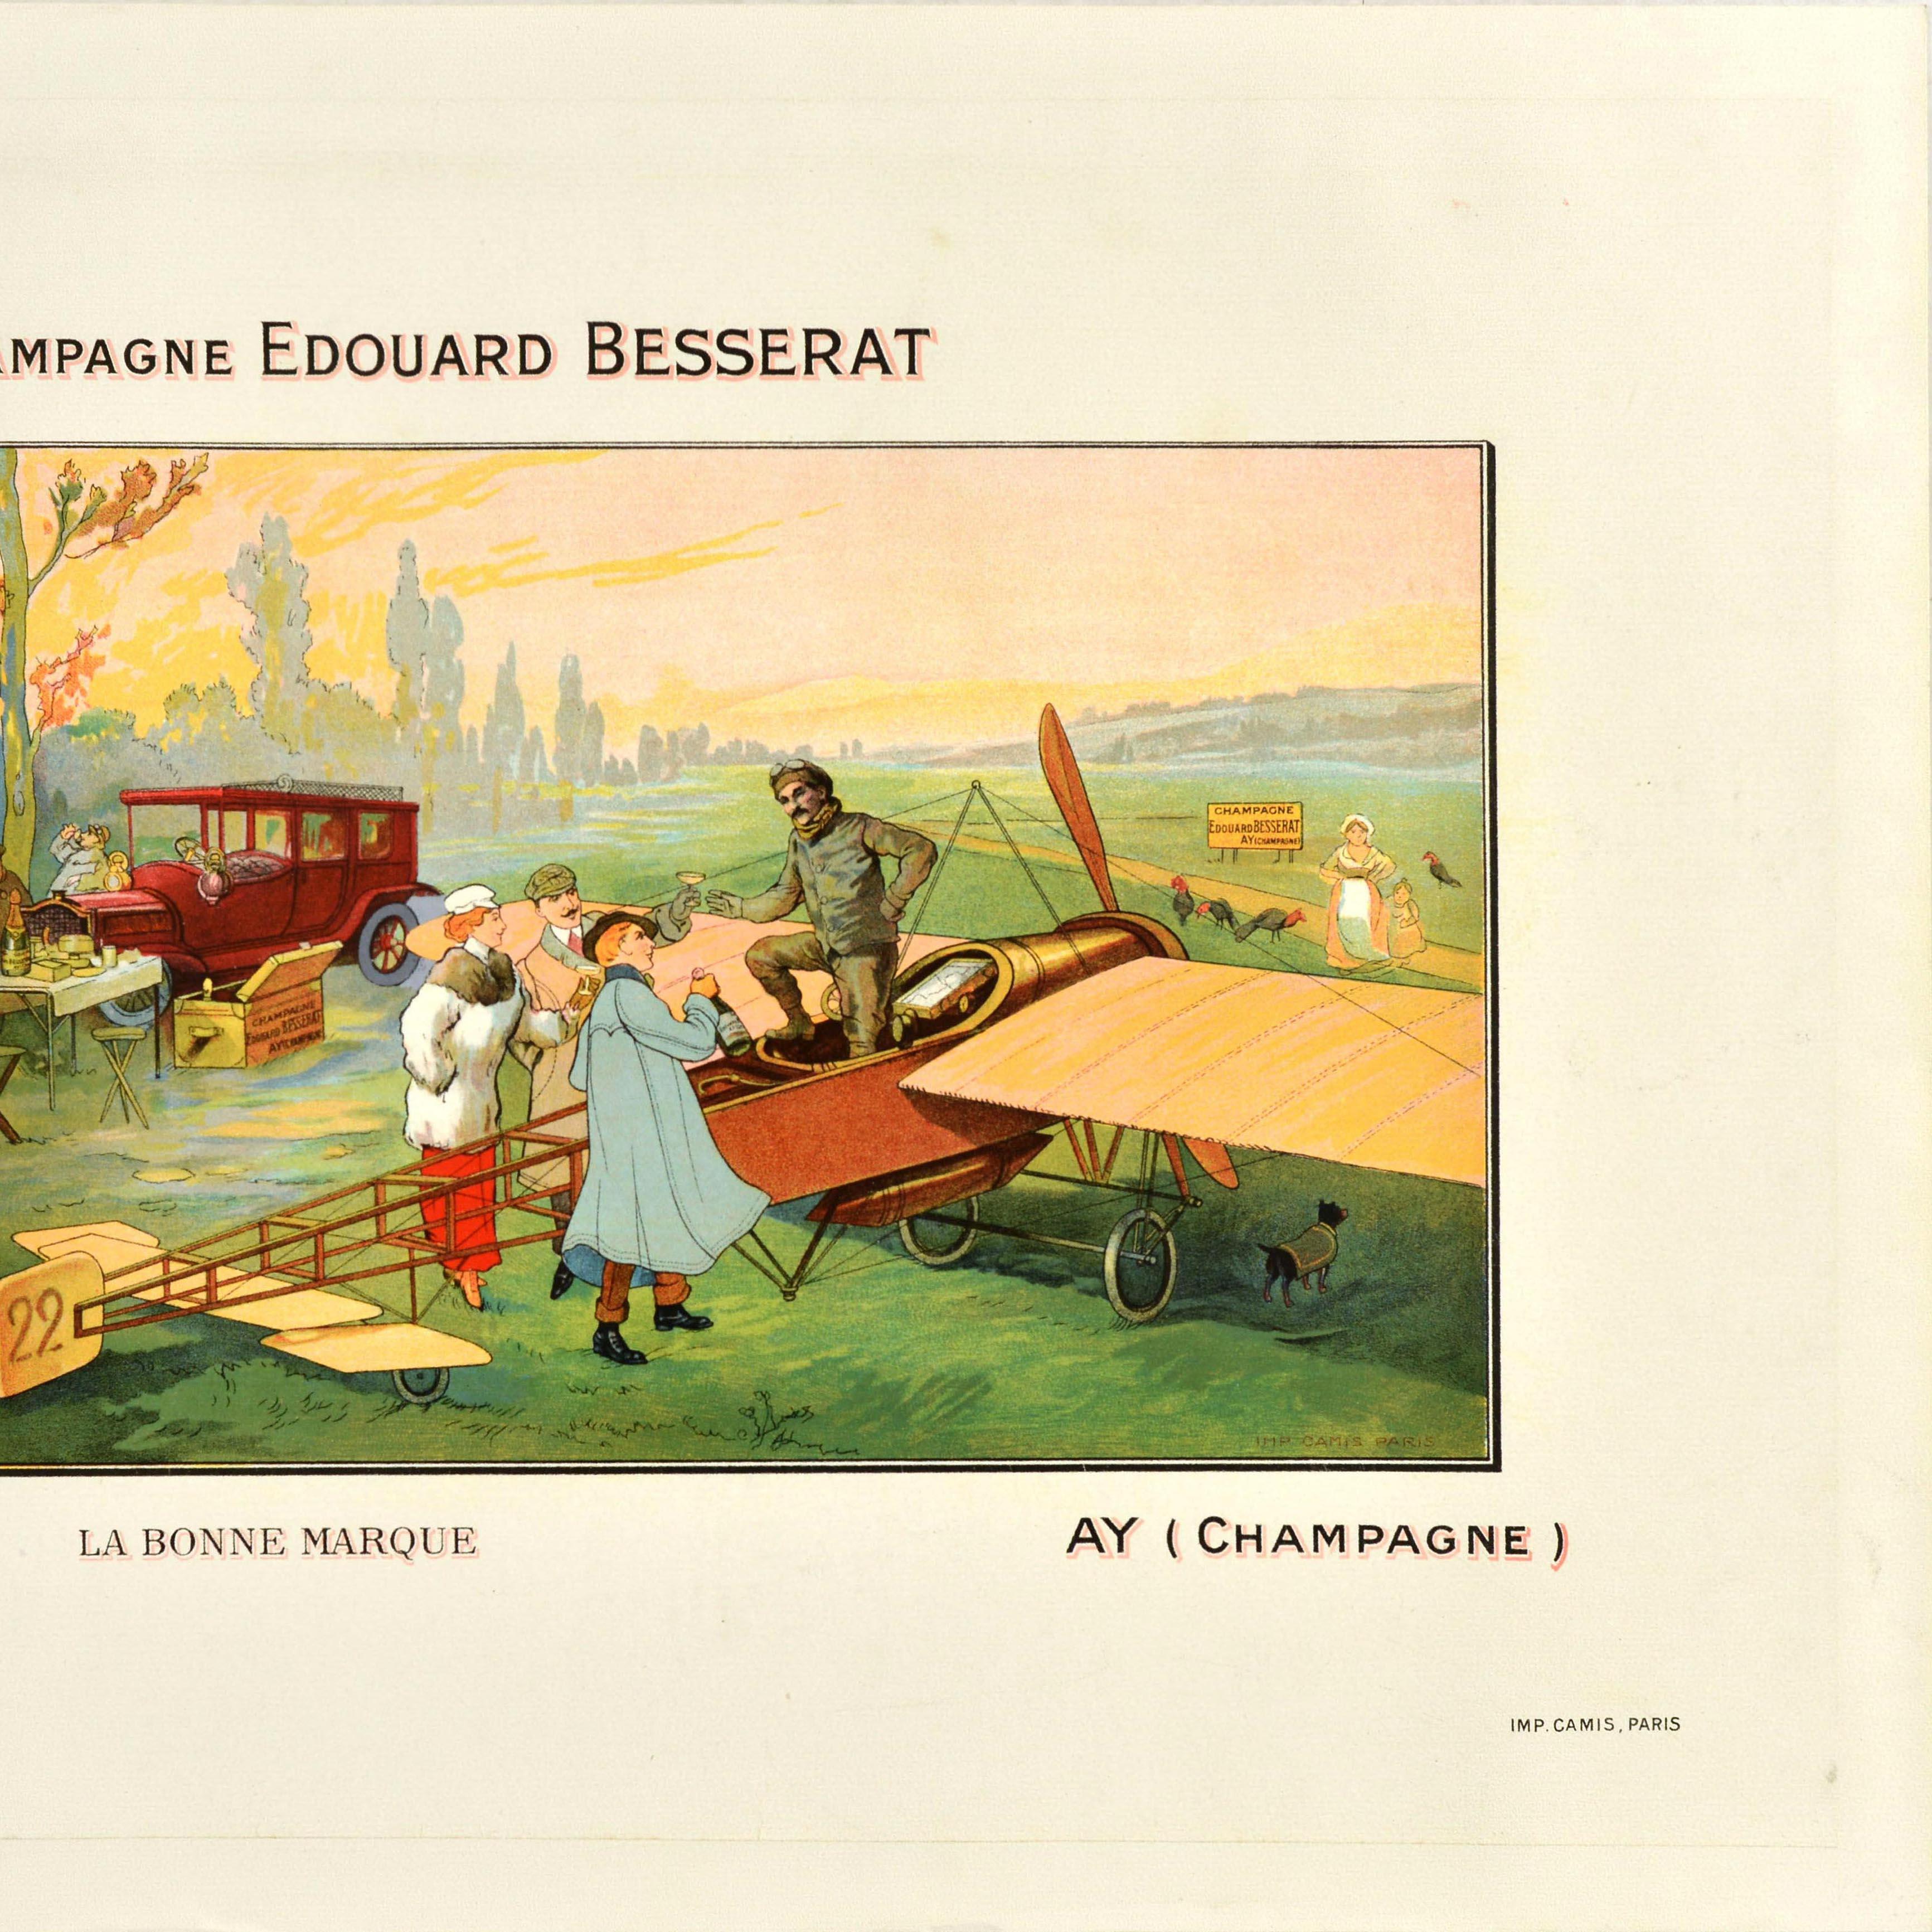 Original Antique Drink Advertising Poster Champagne Edouard Besserat Plane Pilot In Good Condition For Sale In London, GB